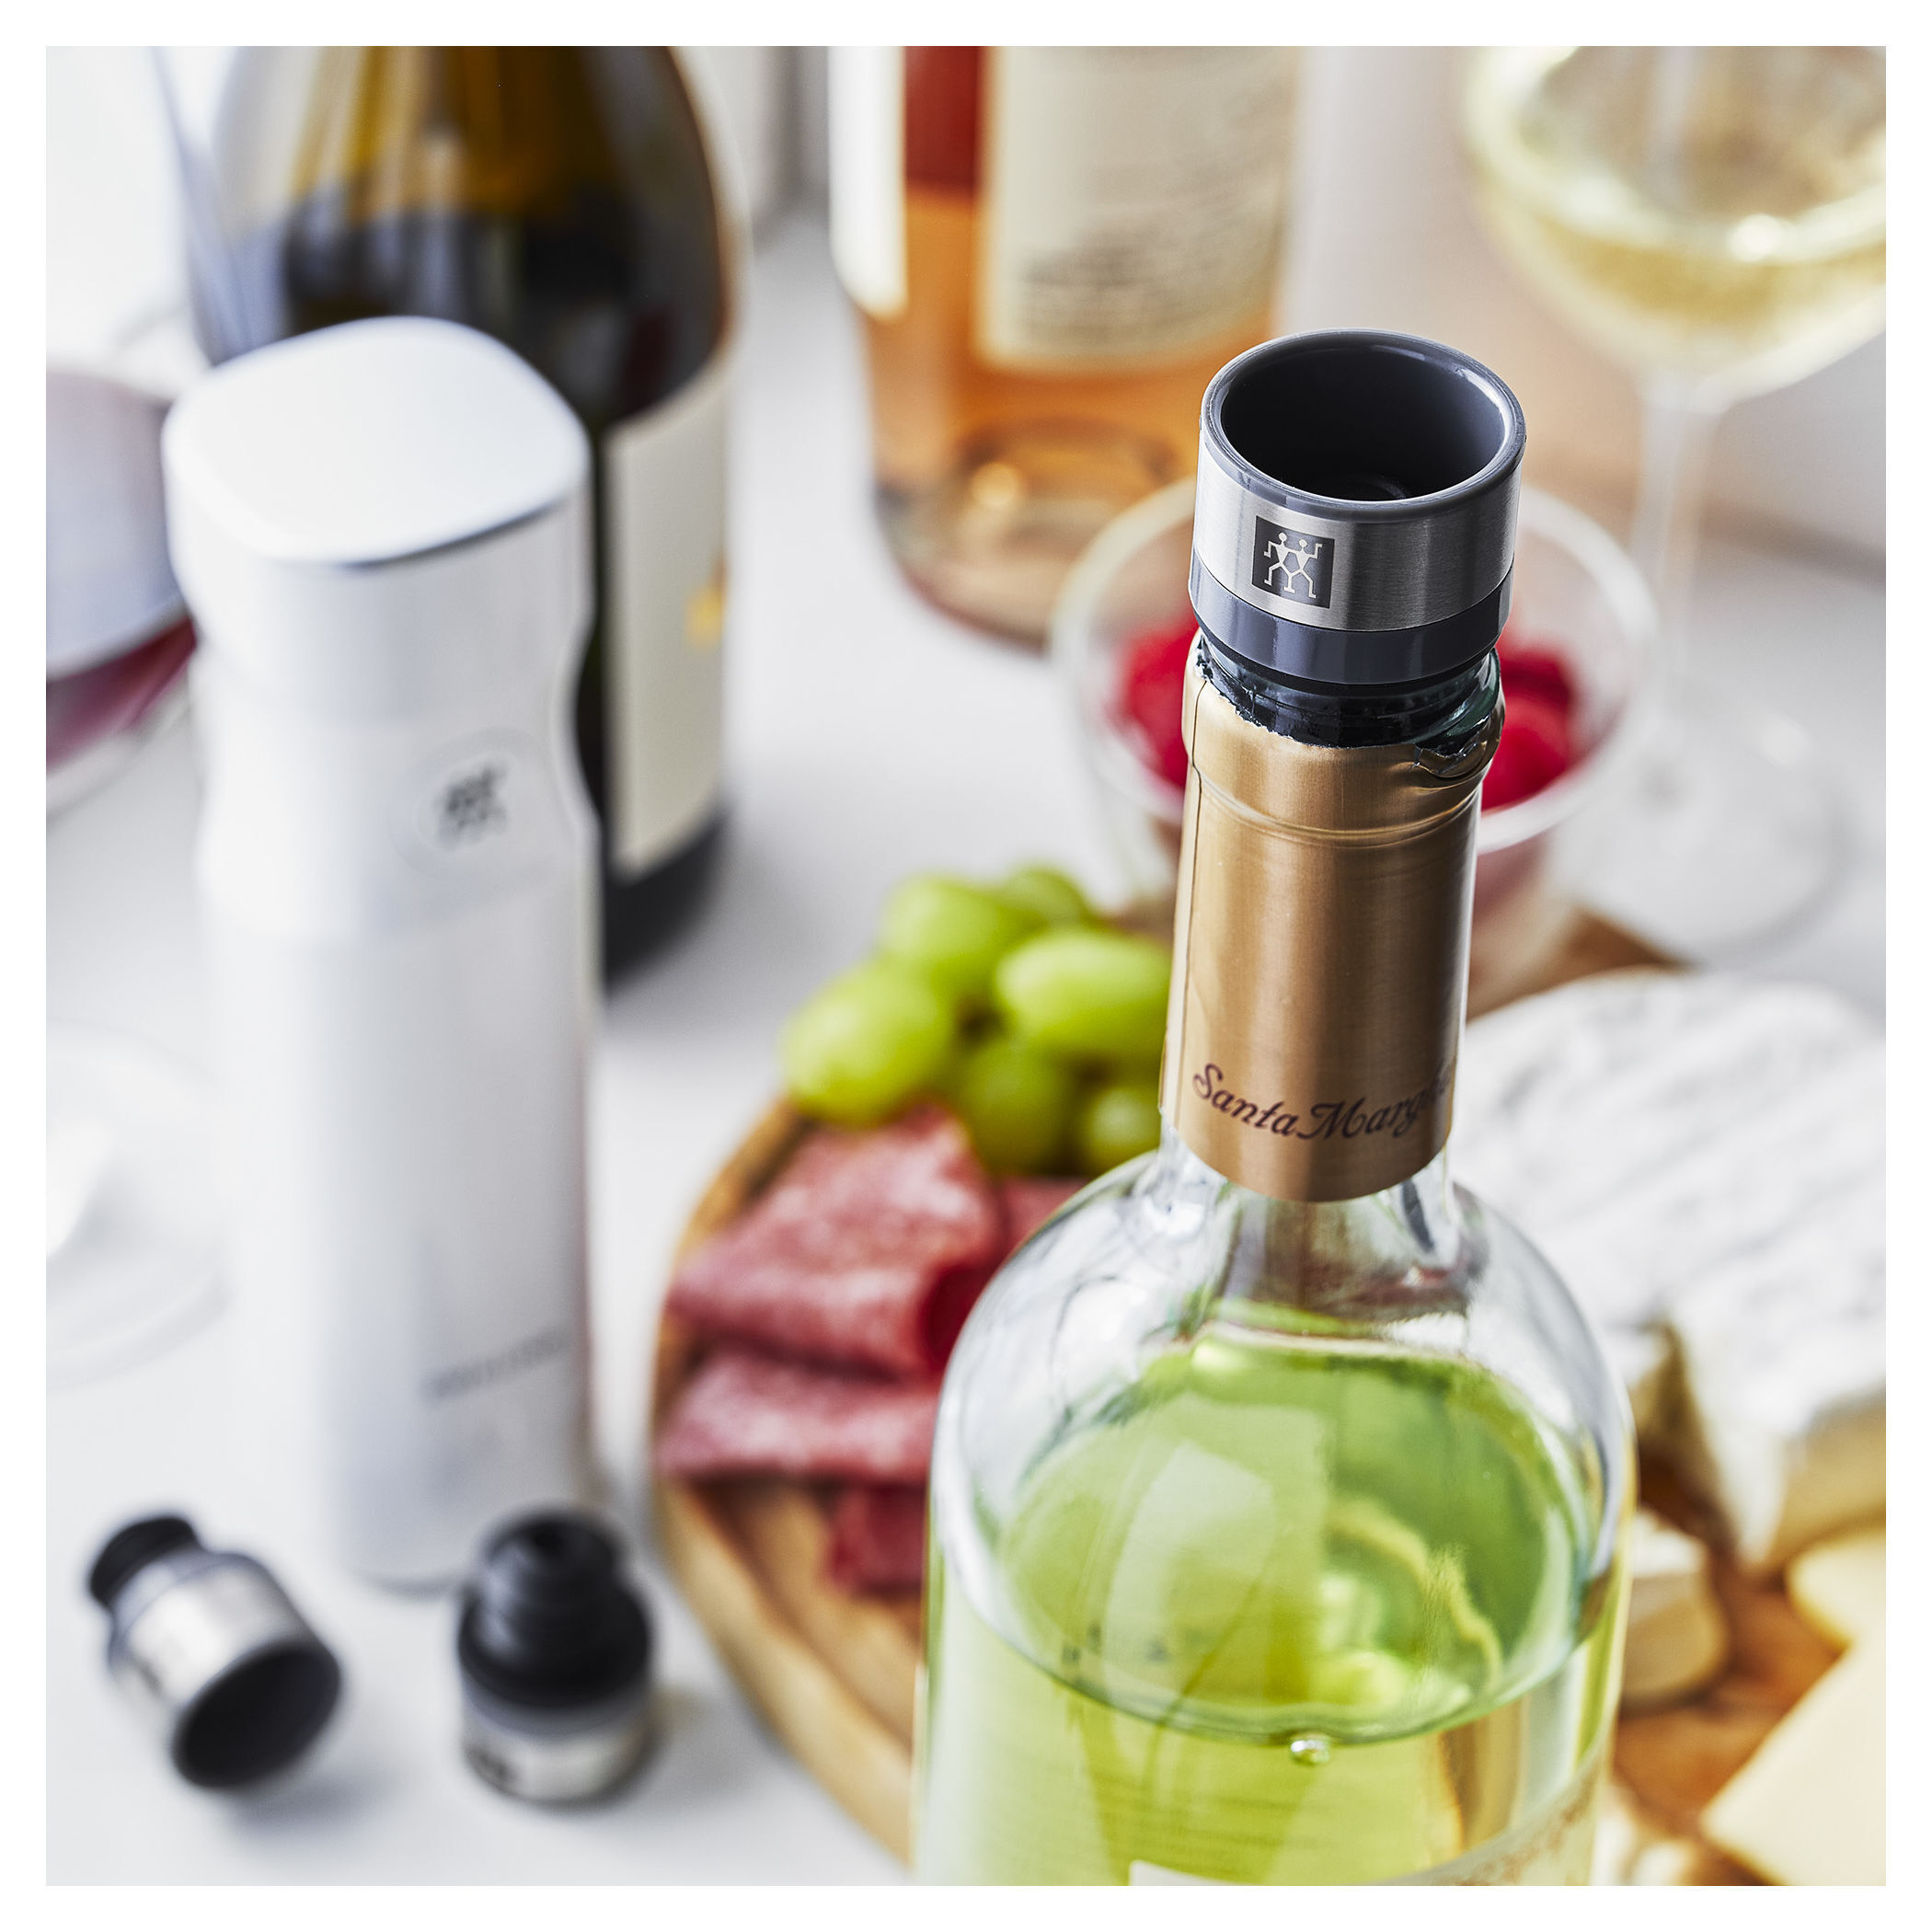 Reusable Vacuum Rubber Sealer Wine Stoppers 2 Pieces Stainless Steel Wine Bottle Plug Saver Keeps Wine Fresh